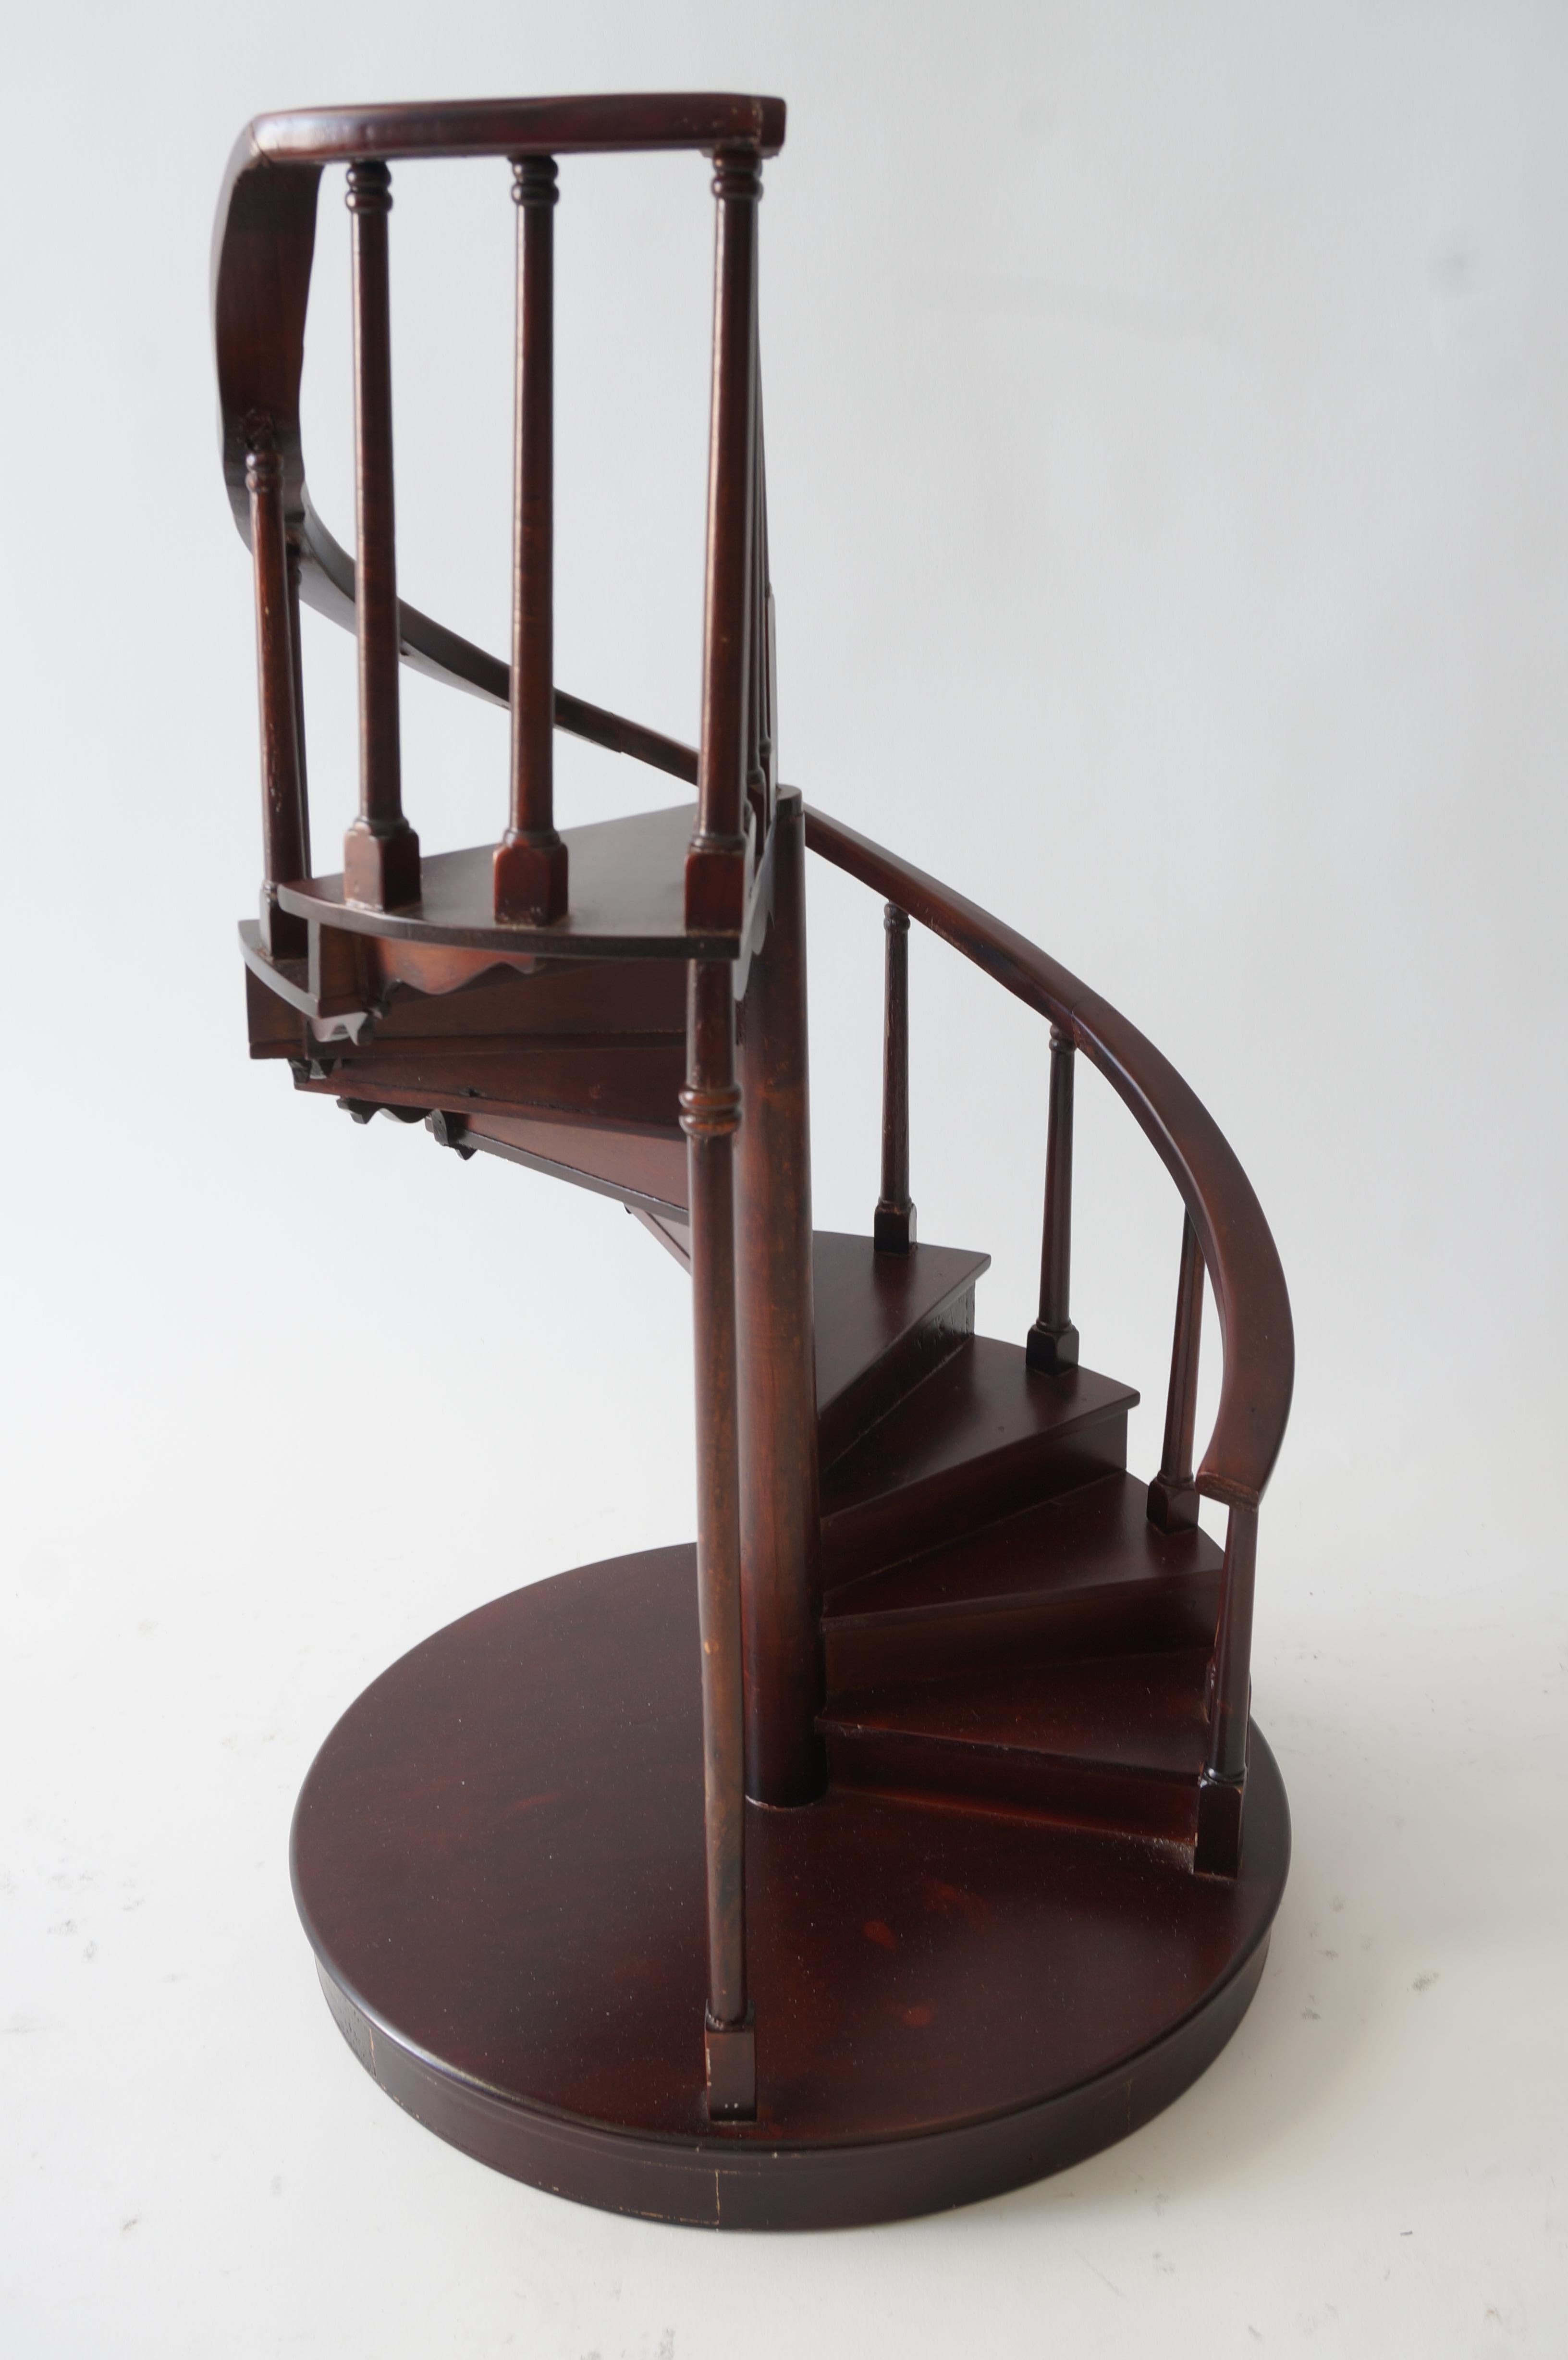 Vintage spiral staircase architectural Model in Mahogany from a Palm Beach estate

We have a similar one listed on 1stDibs 1/4